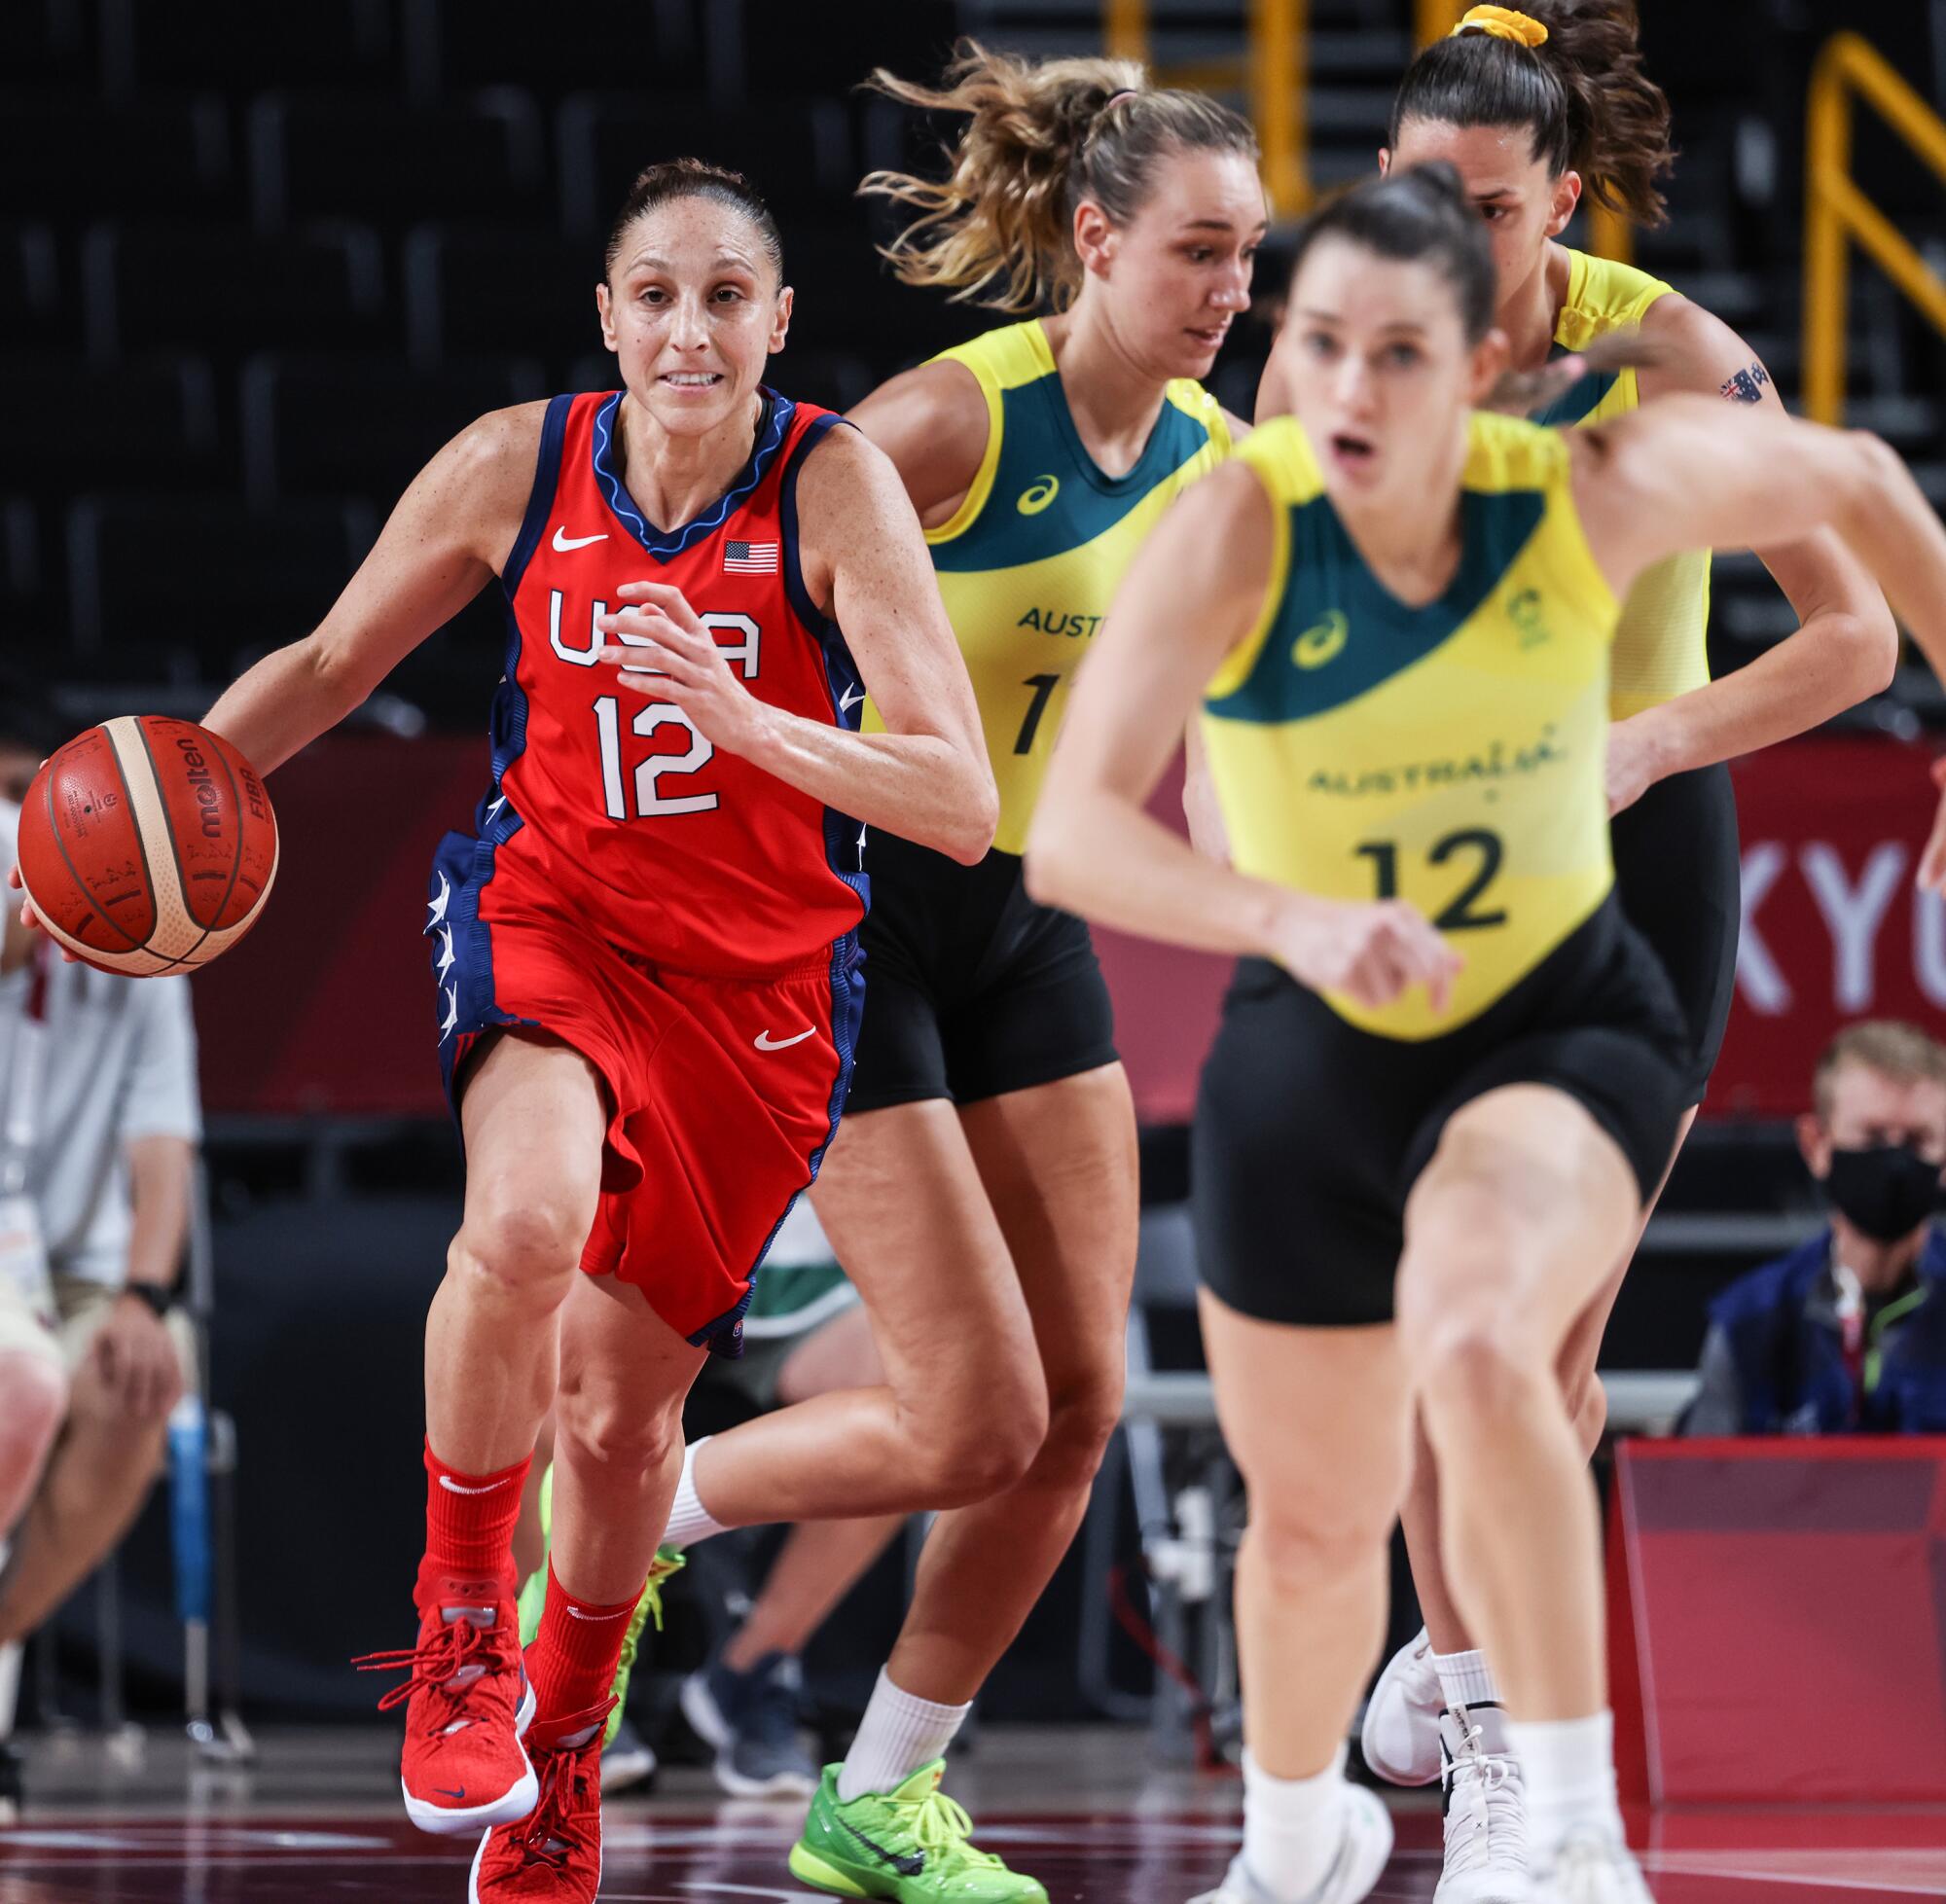 Diana Taurasi runs up the court with the ball during women's basketball at the Tokyo Olympics.